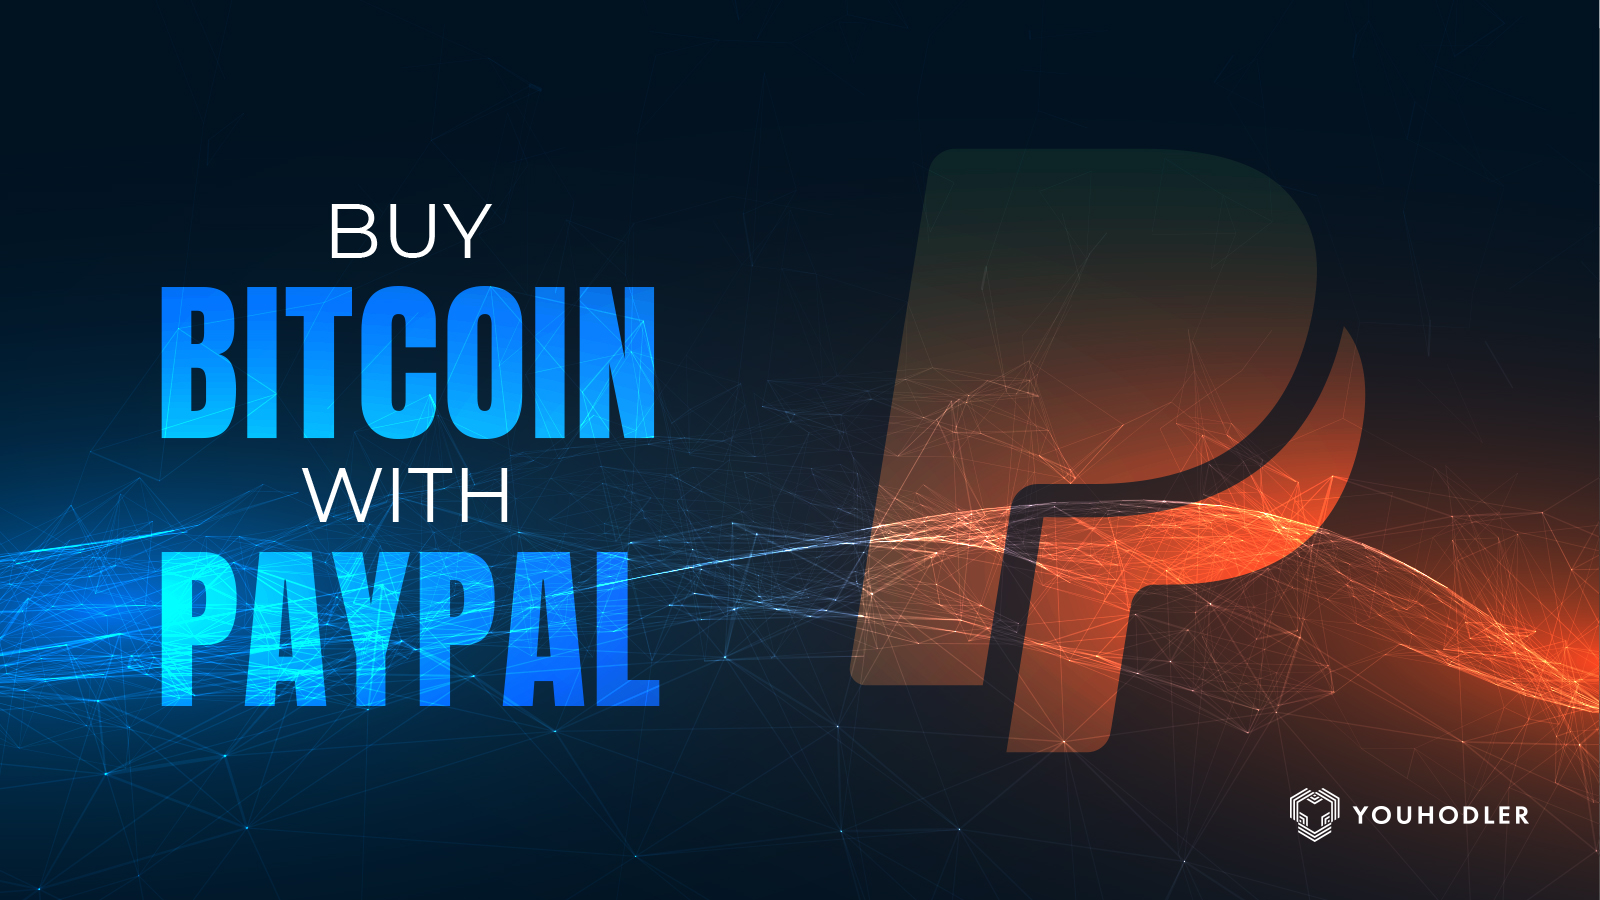 Buy Bitcoin: Now Even Easier with PayPay and Venmo